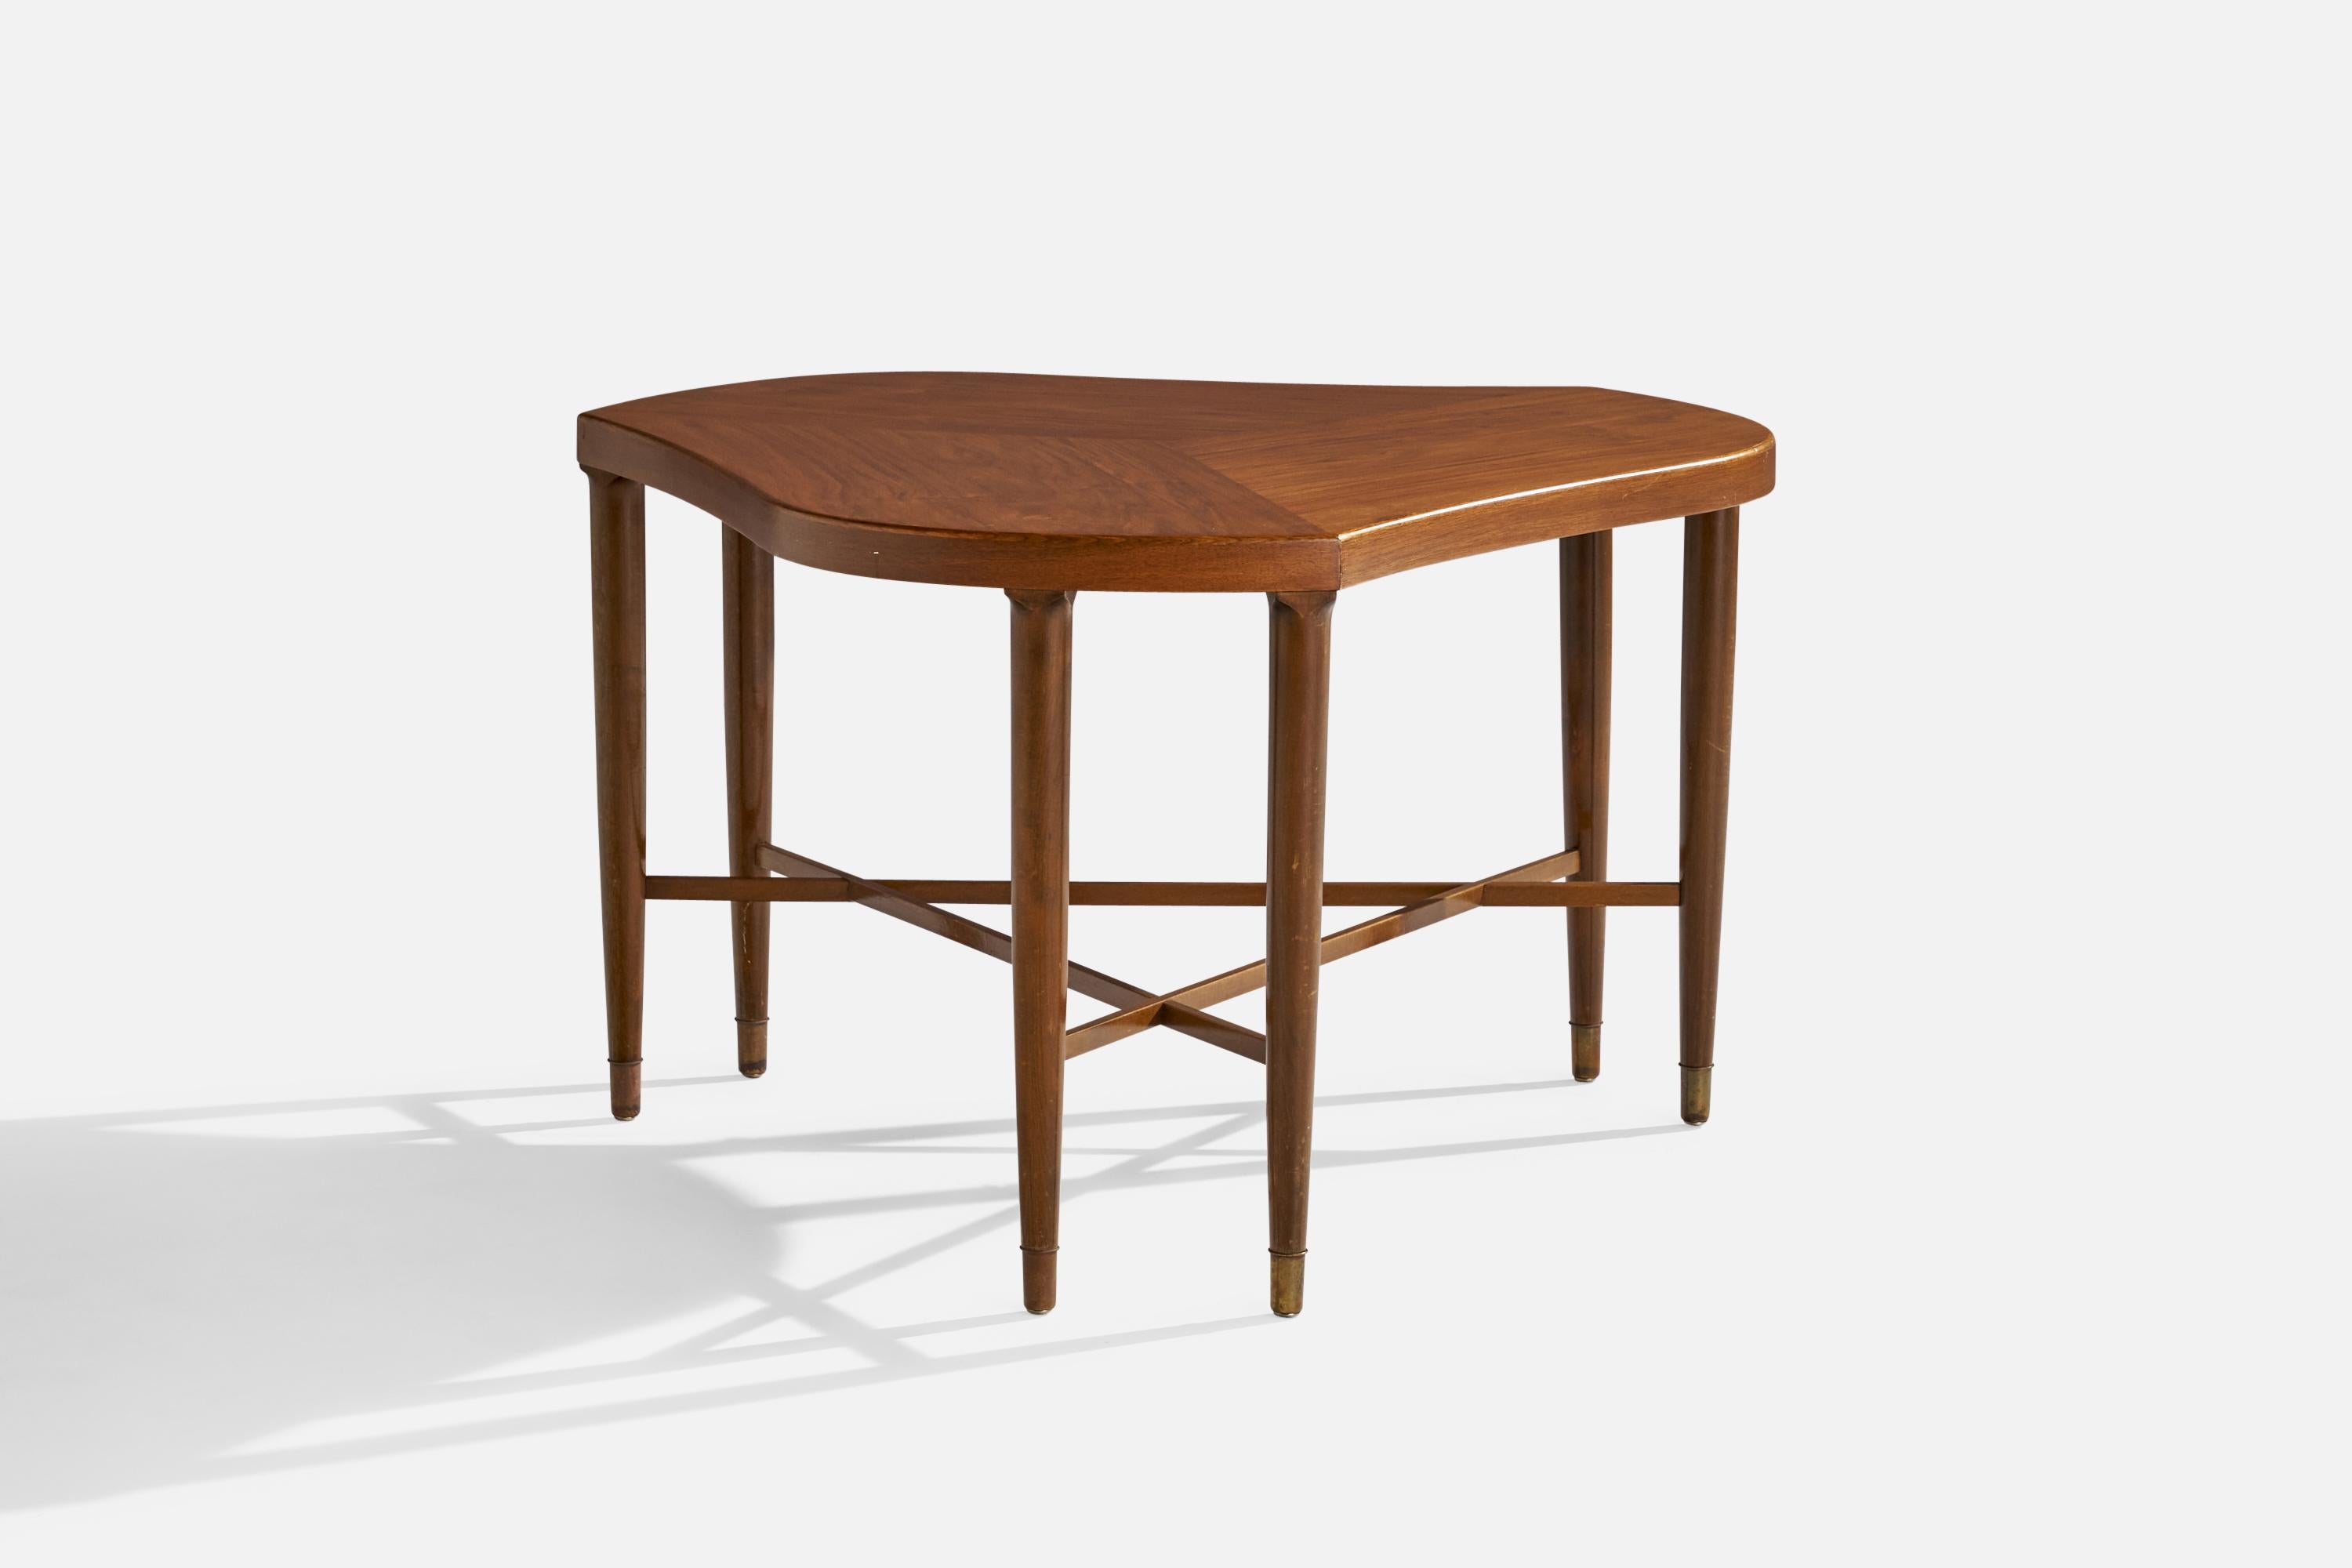 A freeform walnut and brass side table designed and produced in the US, 1954.